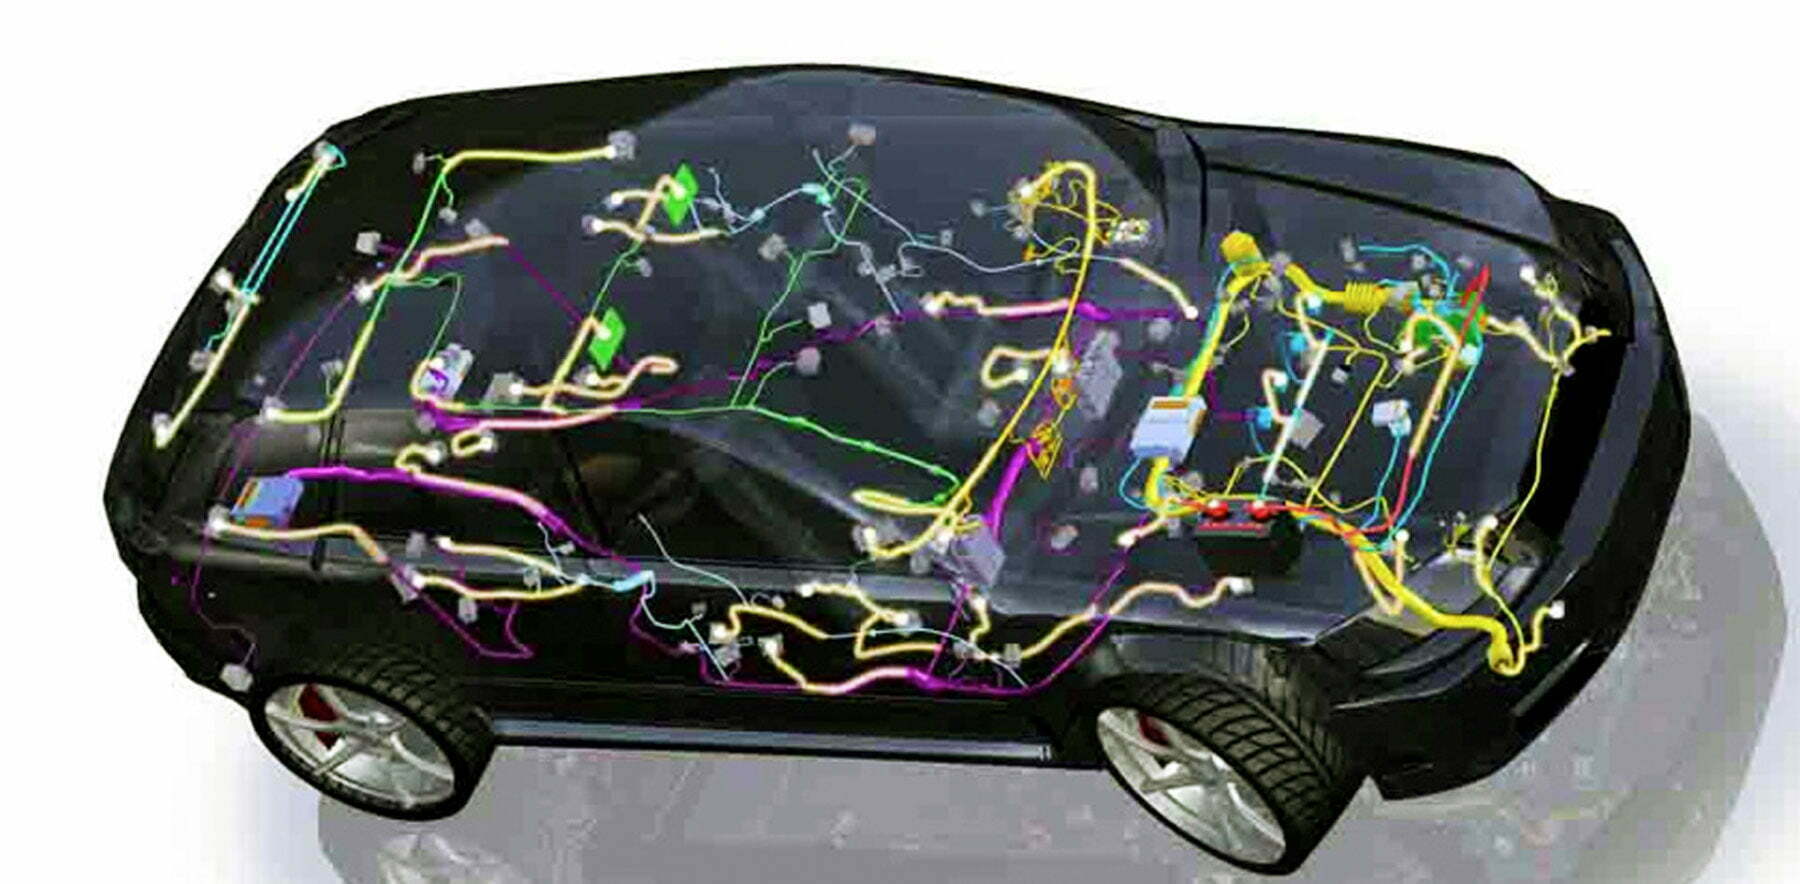 black car with schematic of different electrical components